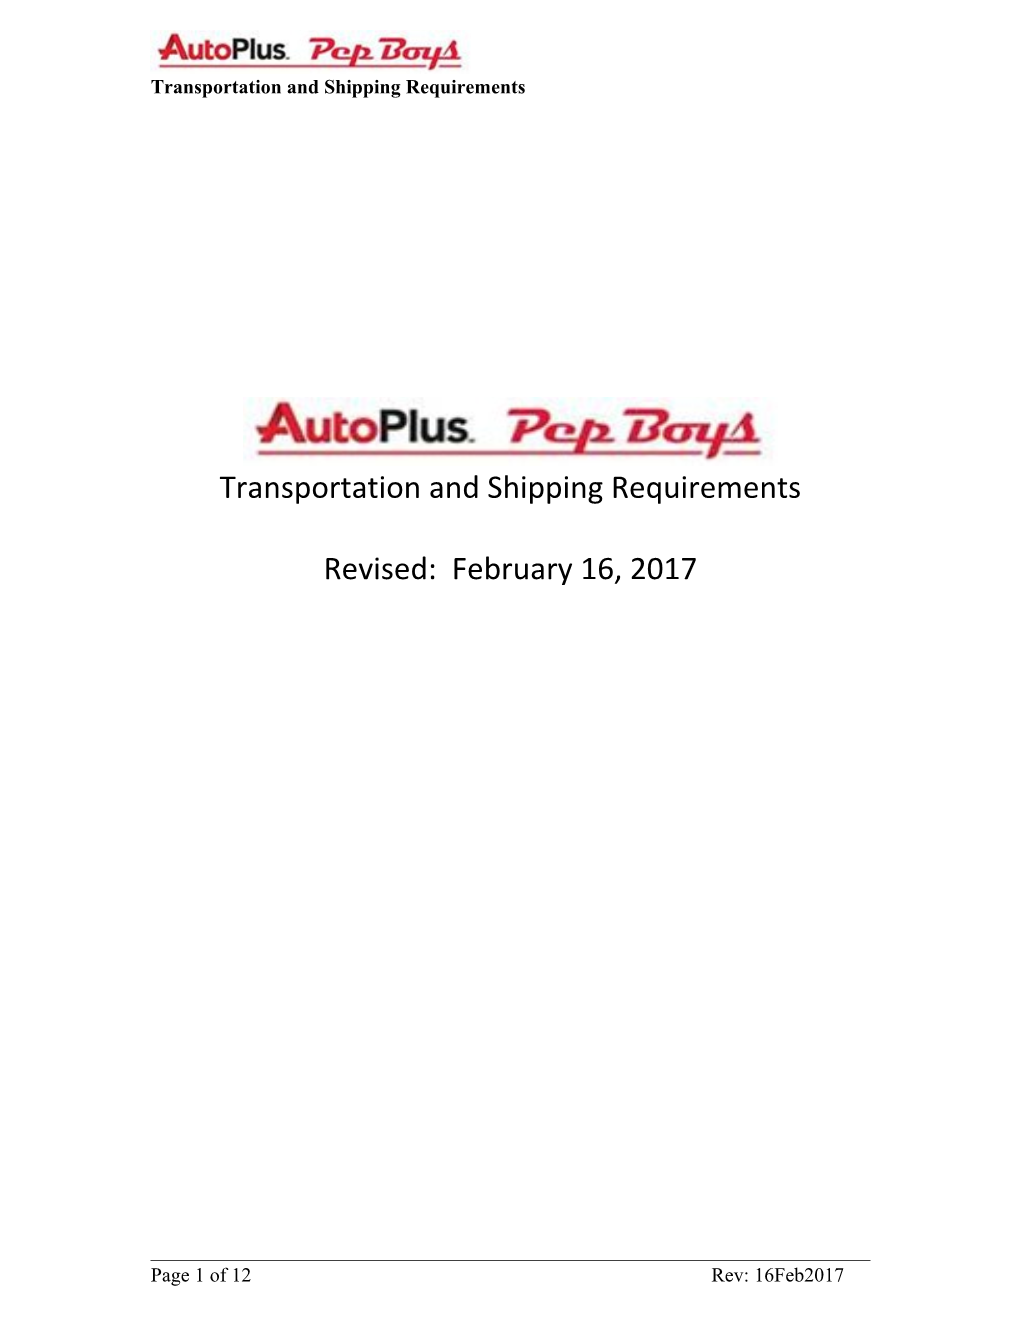 Transportation and Shipping Requirements